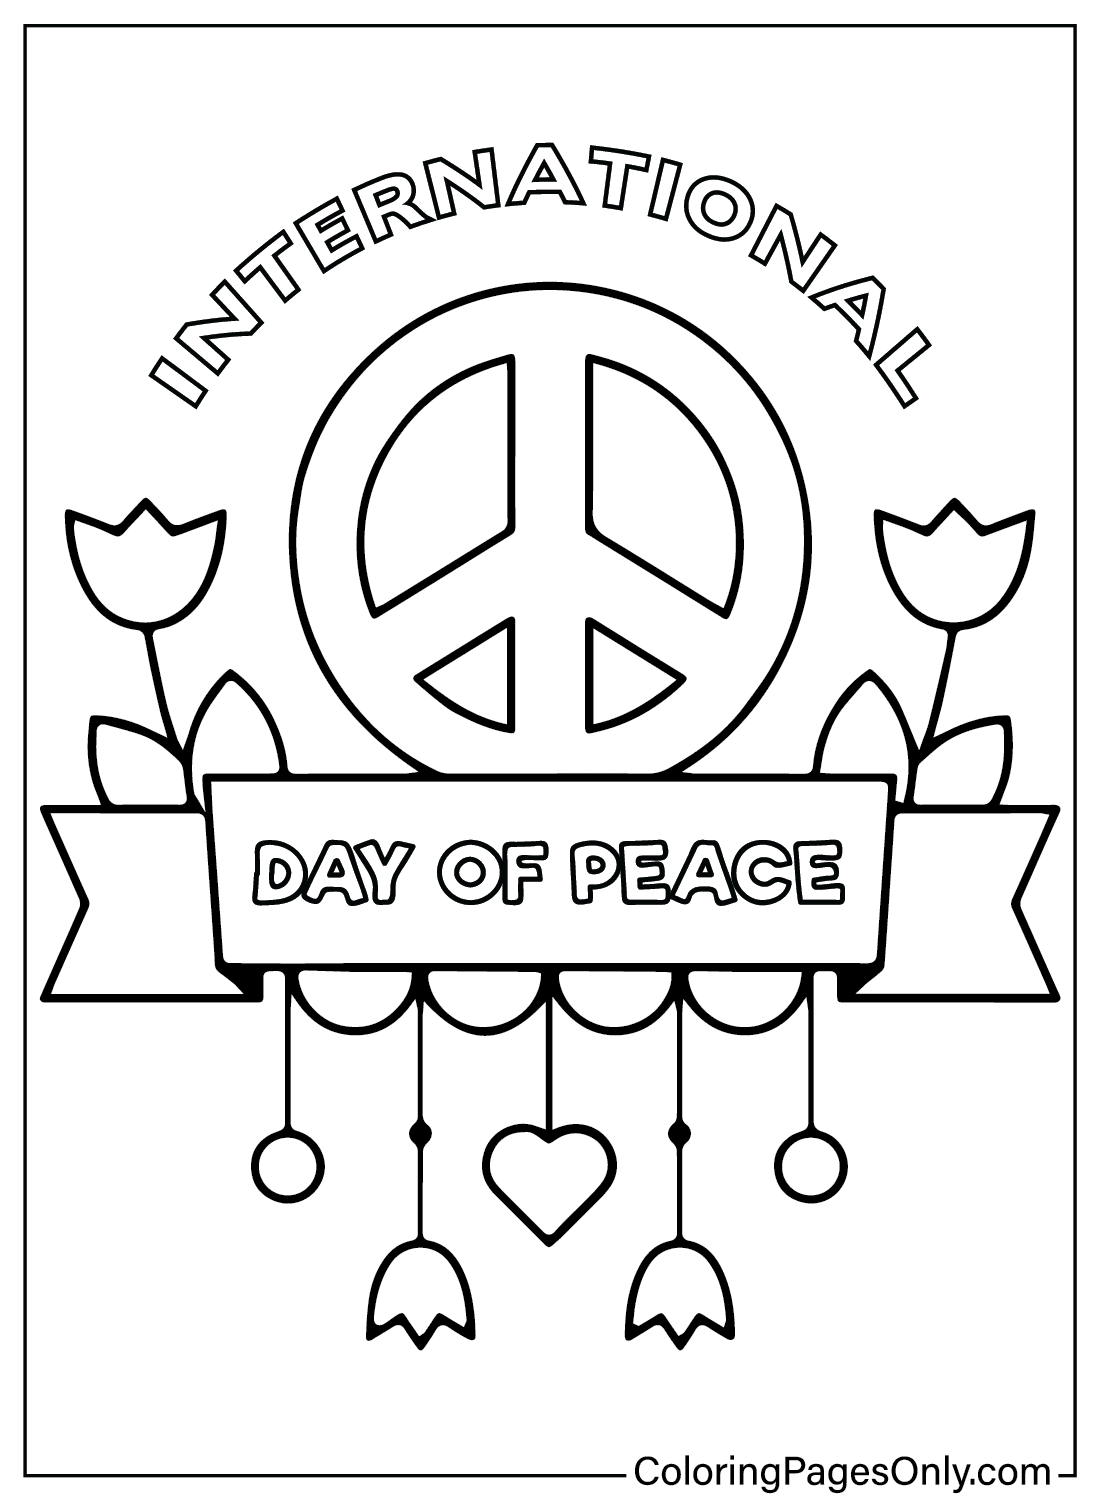 International Day of Peace to Color